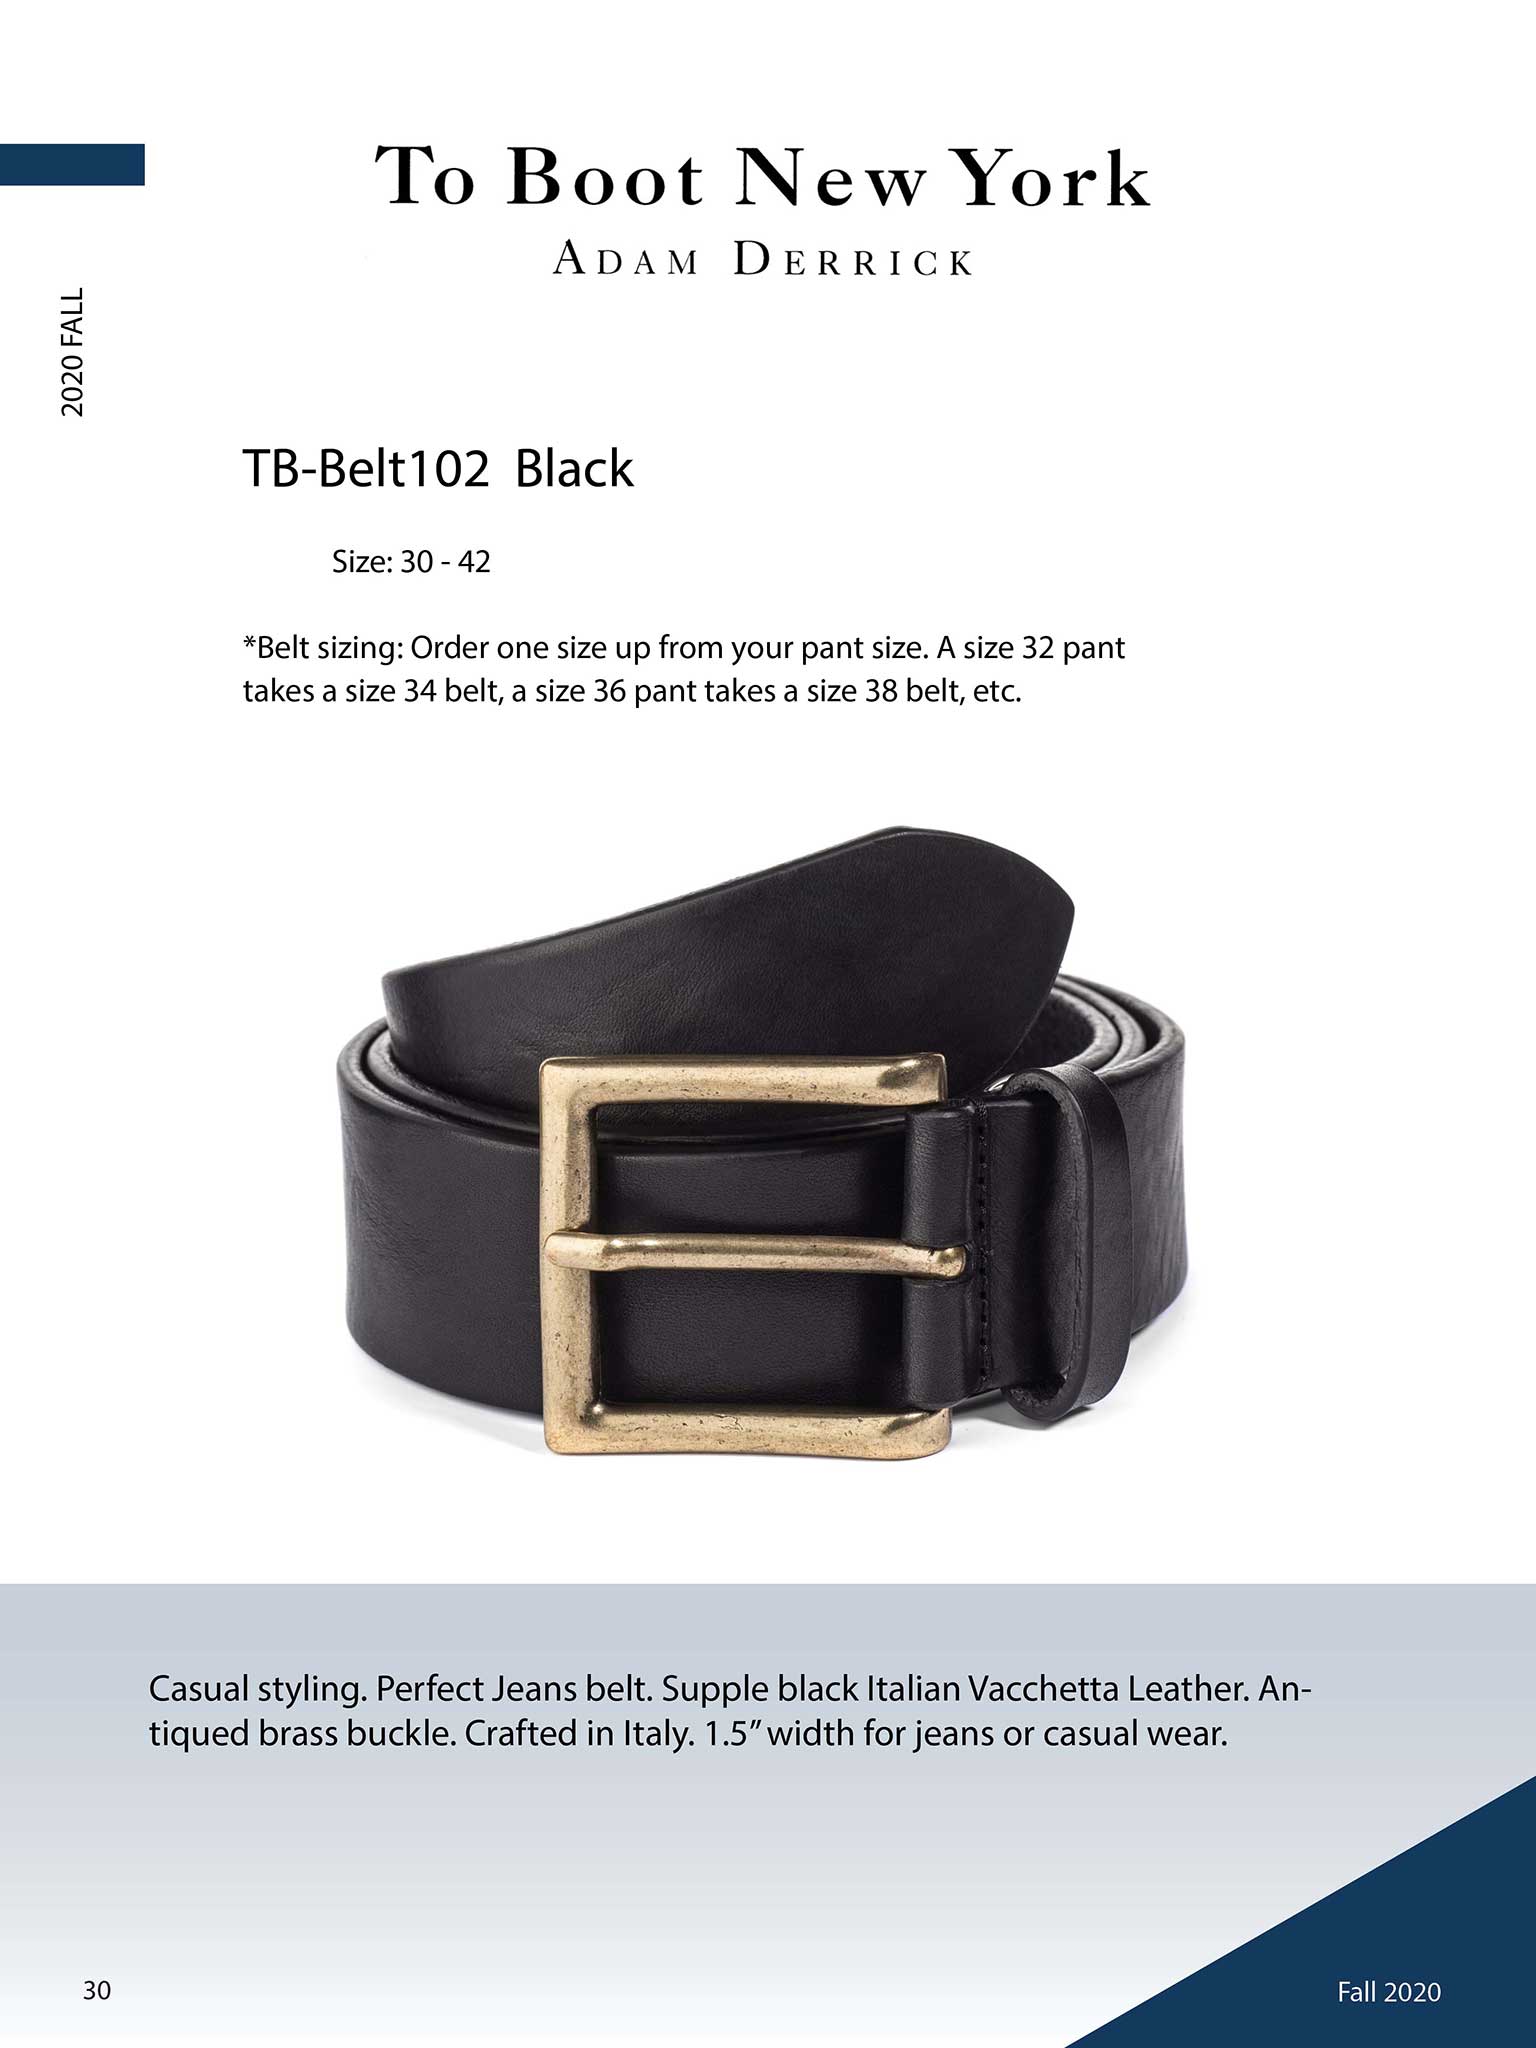 Black Leather Belt by To Boot New York